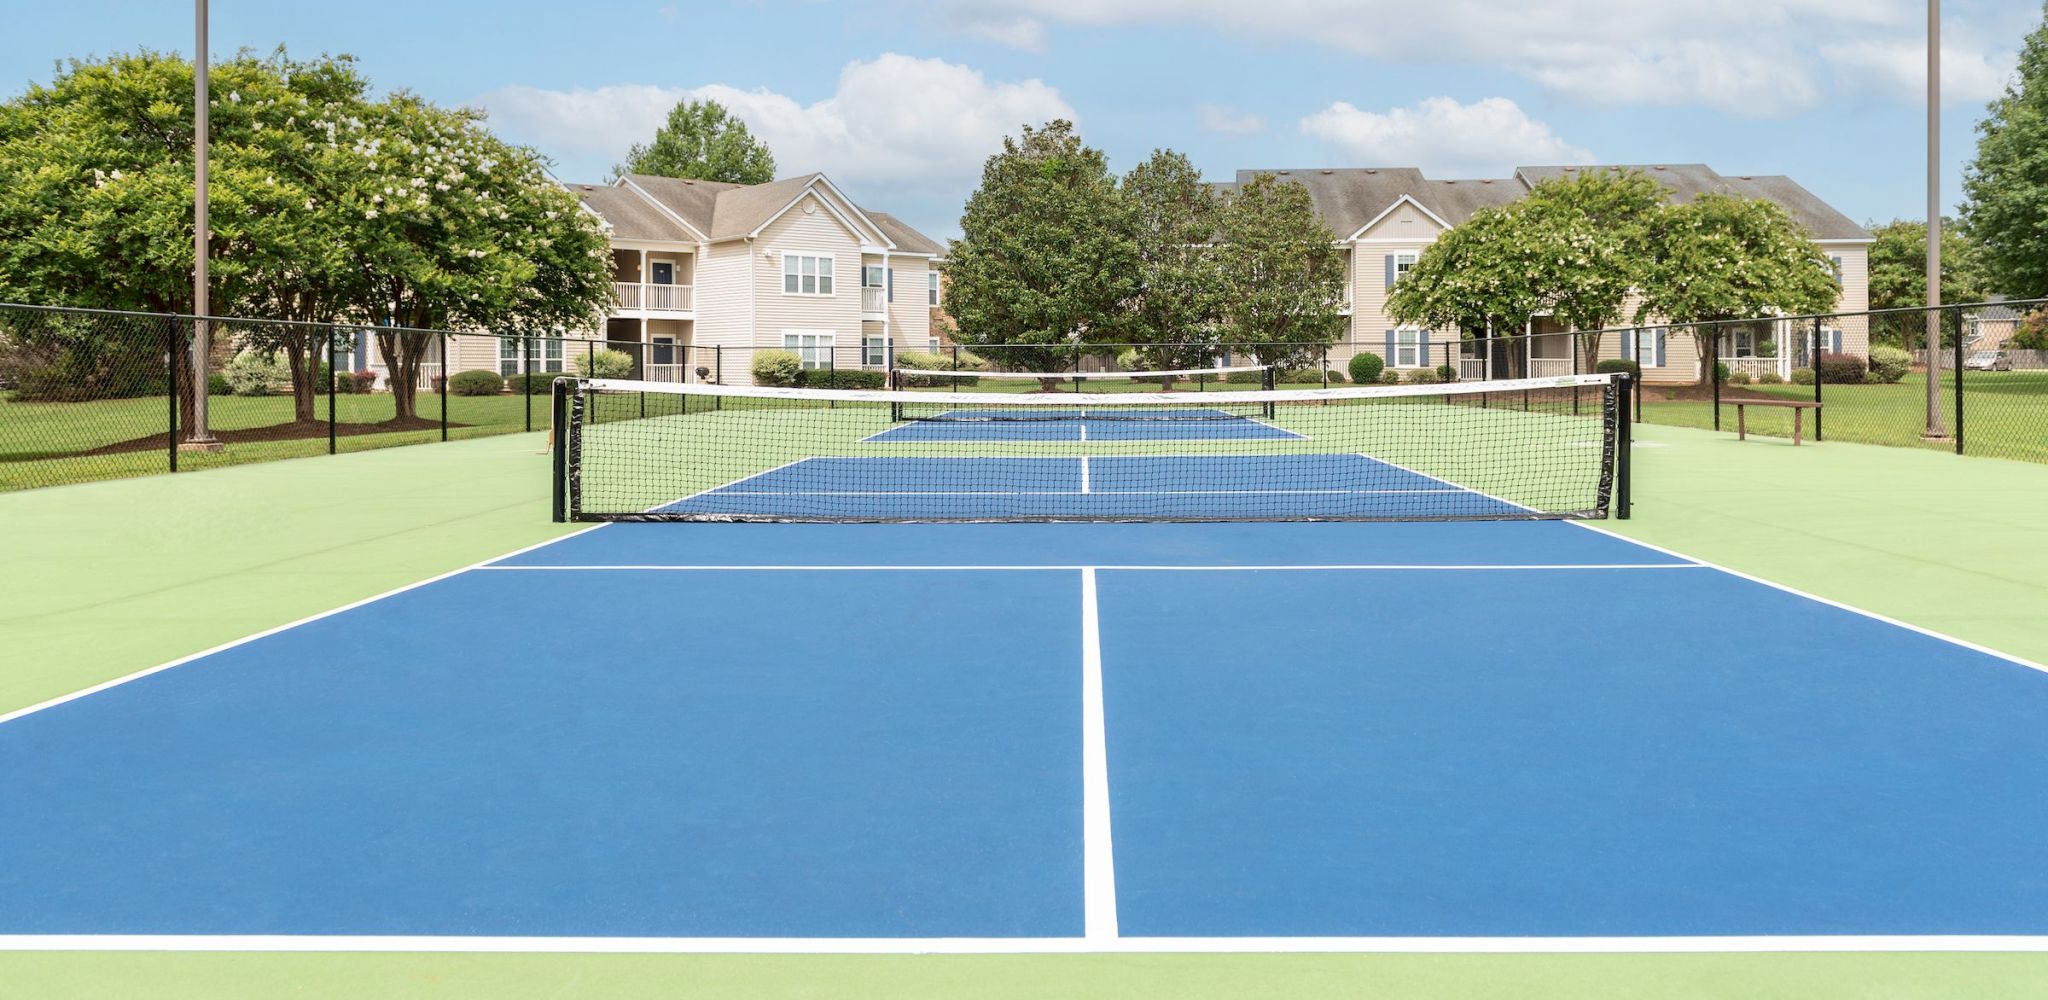 Professional tennis court for active living at Hawthorne Meadowview in Warner Robins, GA